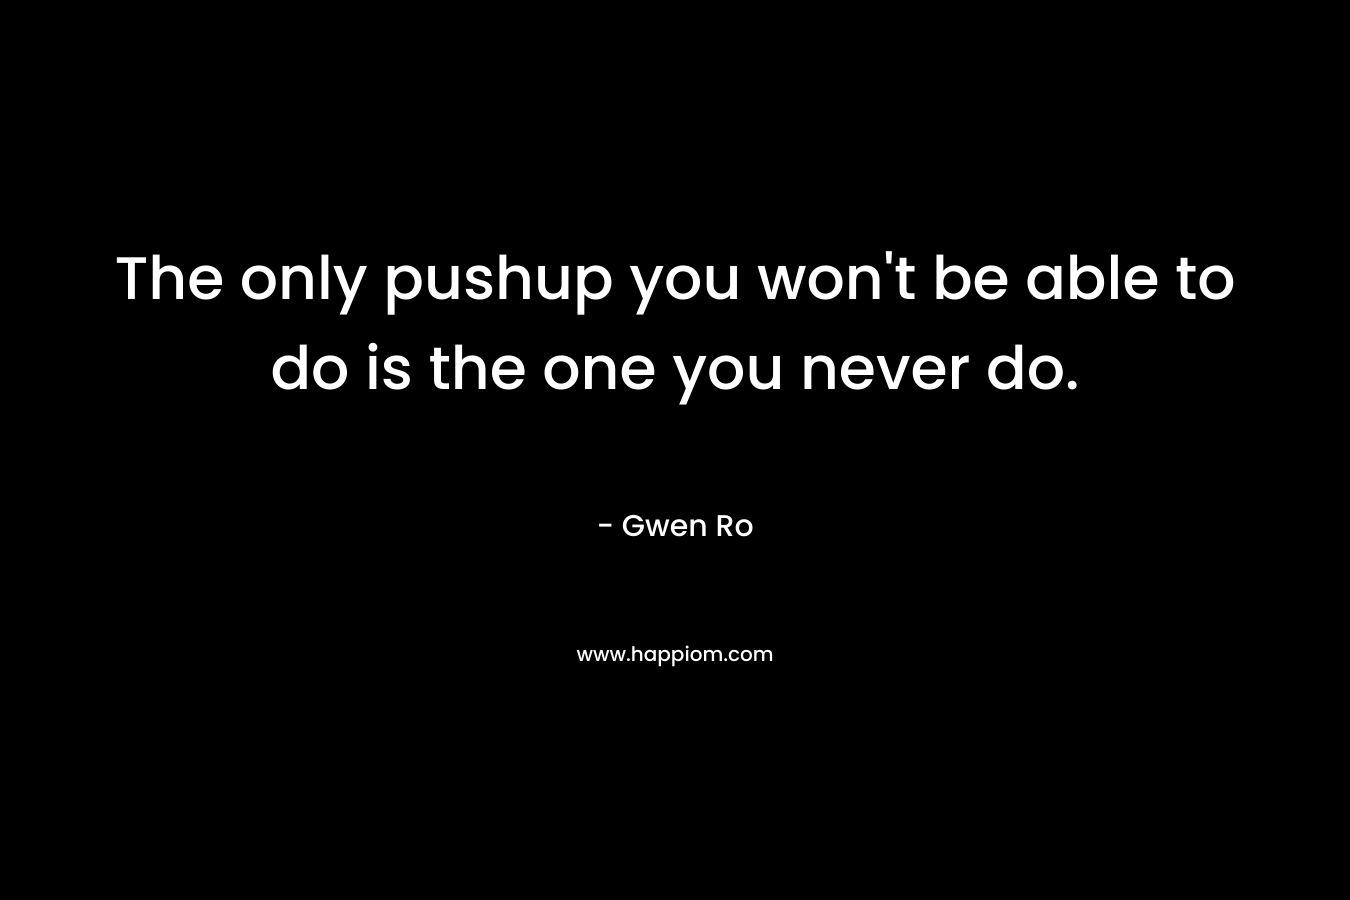 The only pushup you won’t be able to do is the one you never do. – Gwen Ro